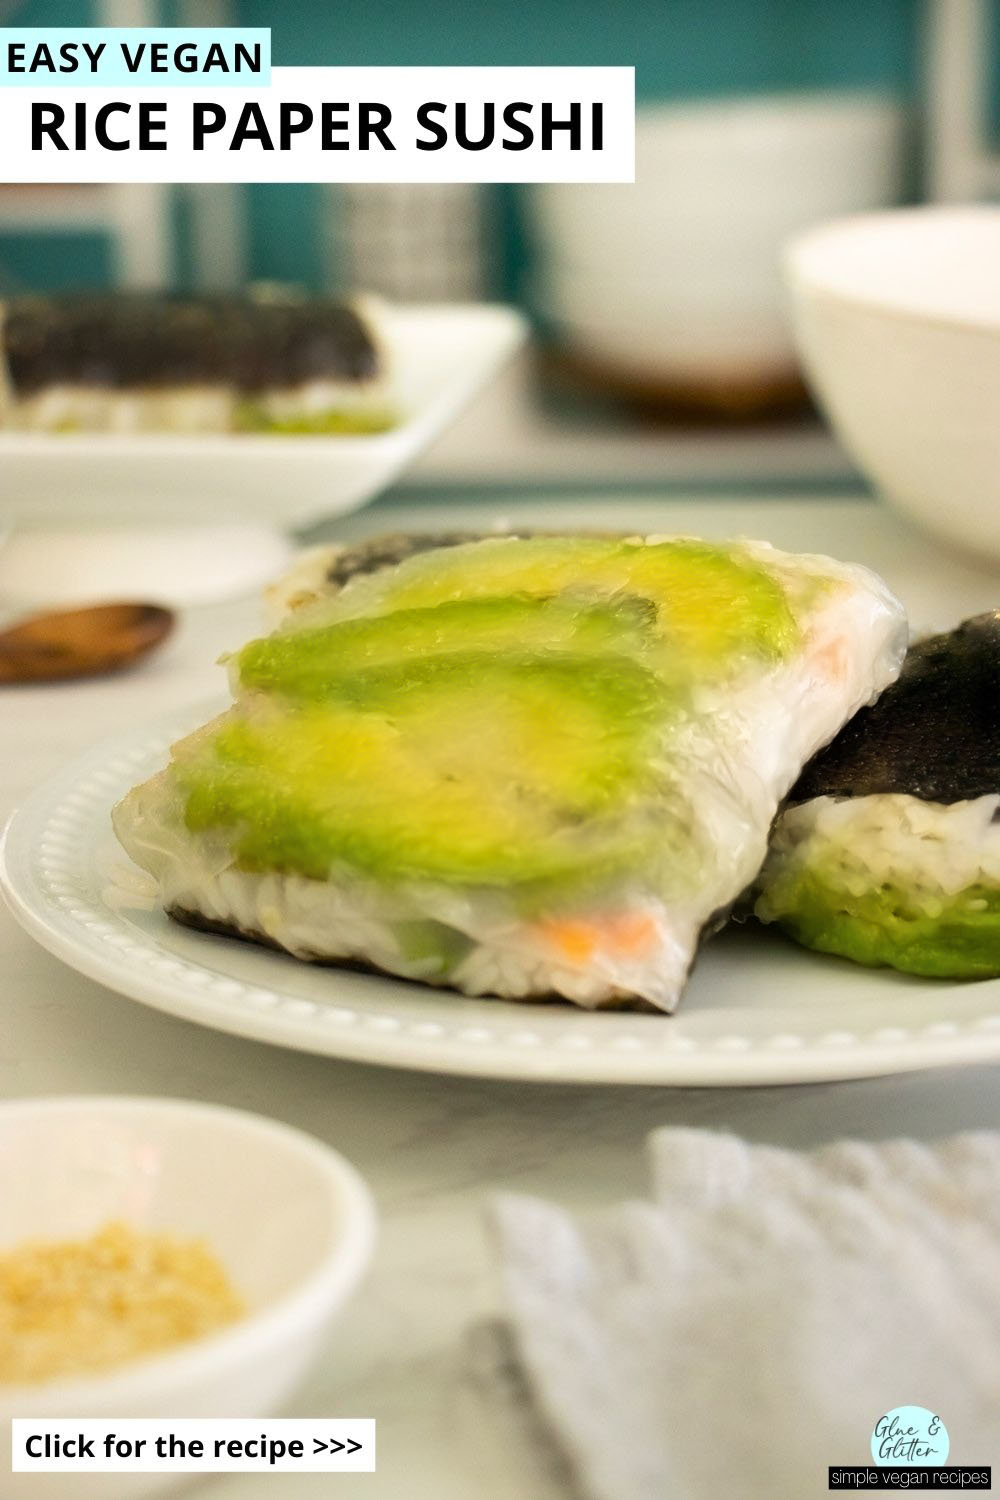 rice paper sushi with avocado and pickled carrots on a white plate, text overlay